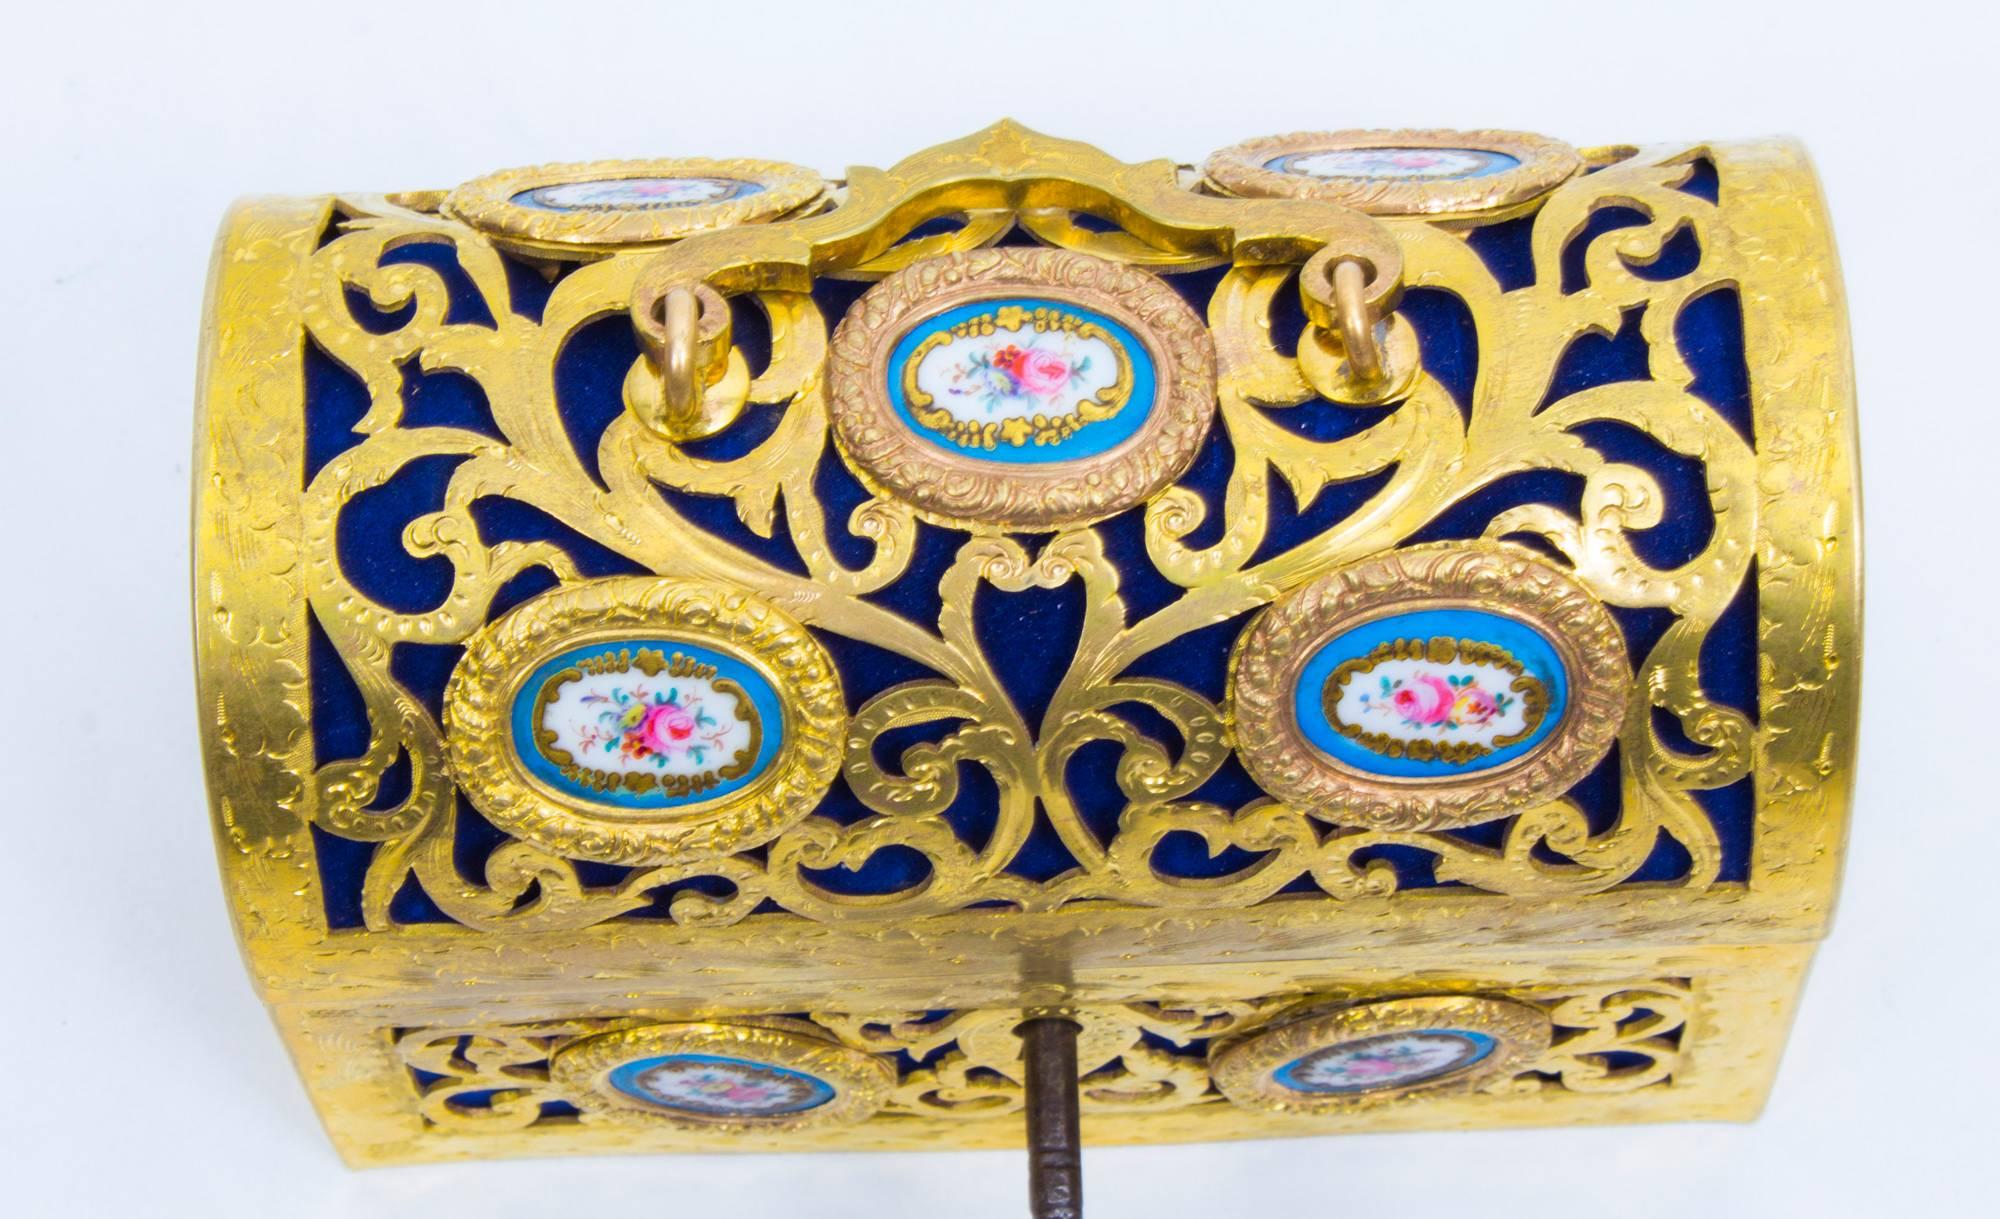 This is a stunning antique 19th century French gilt bronze casket set with florally painted Sevres porcelain panels. 

Of pierced scrolling domed form the casket opens to reveal a beautiful Royal Blue velvet lined interior.

Complete with